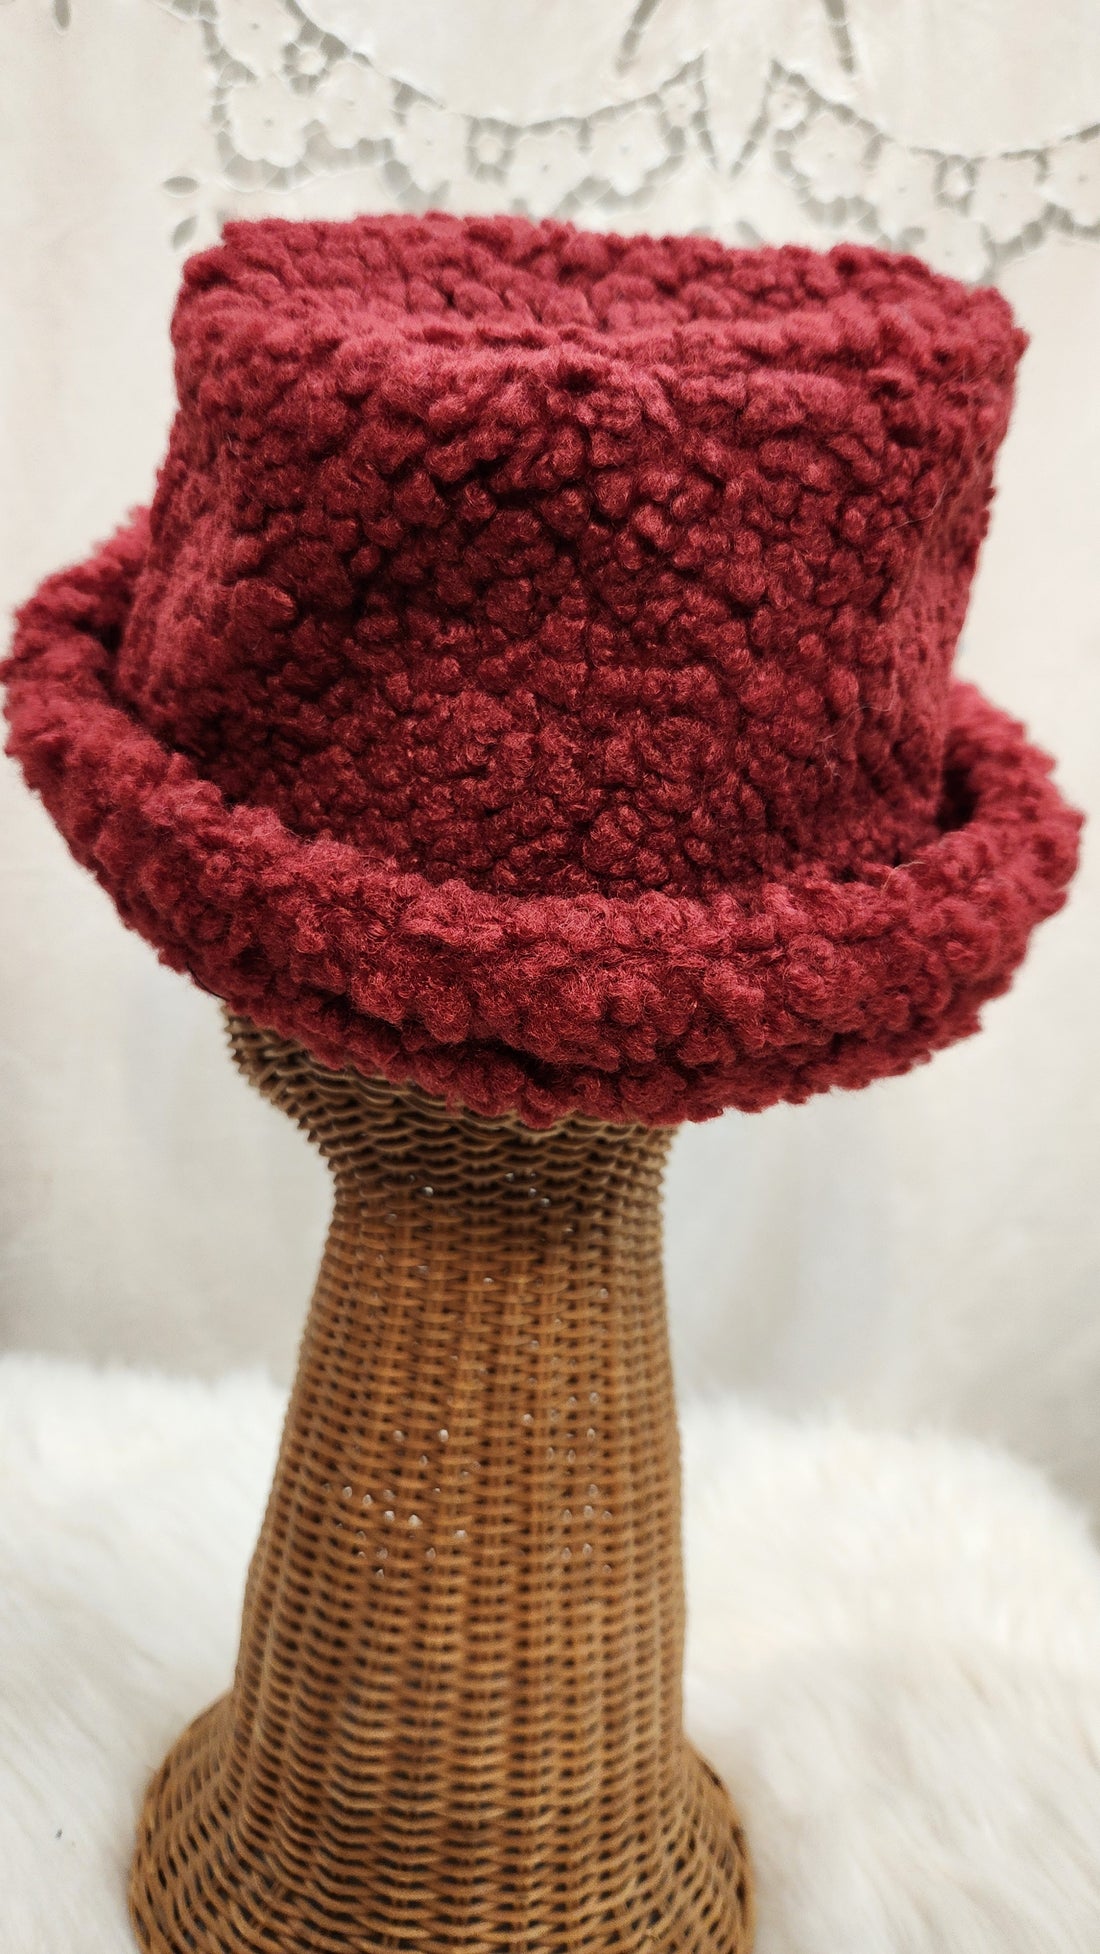 Perfect Fuzzy & Cashmere Bucket Hat - Cute, Comfortable, and Chic!